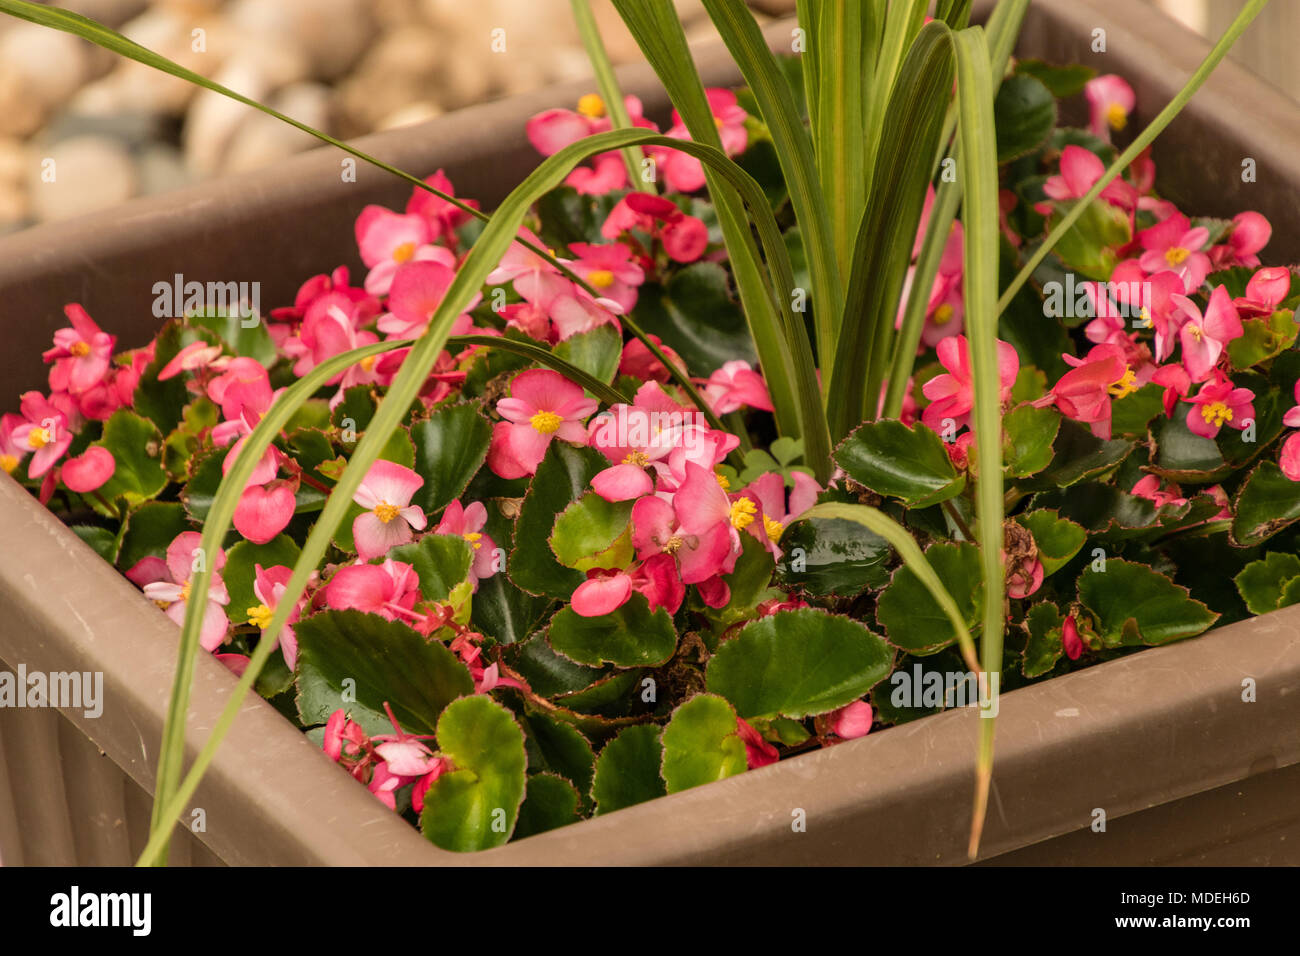 pink begonias growing in a brown planter box Stock Photo